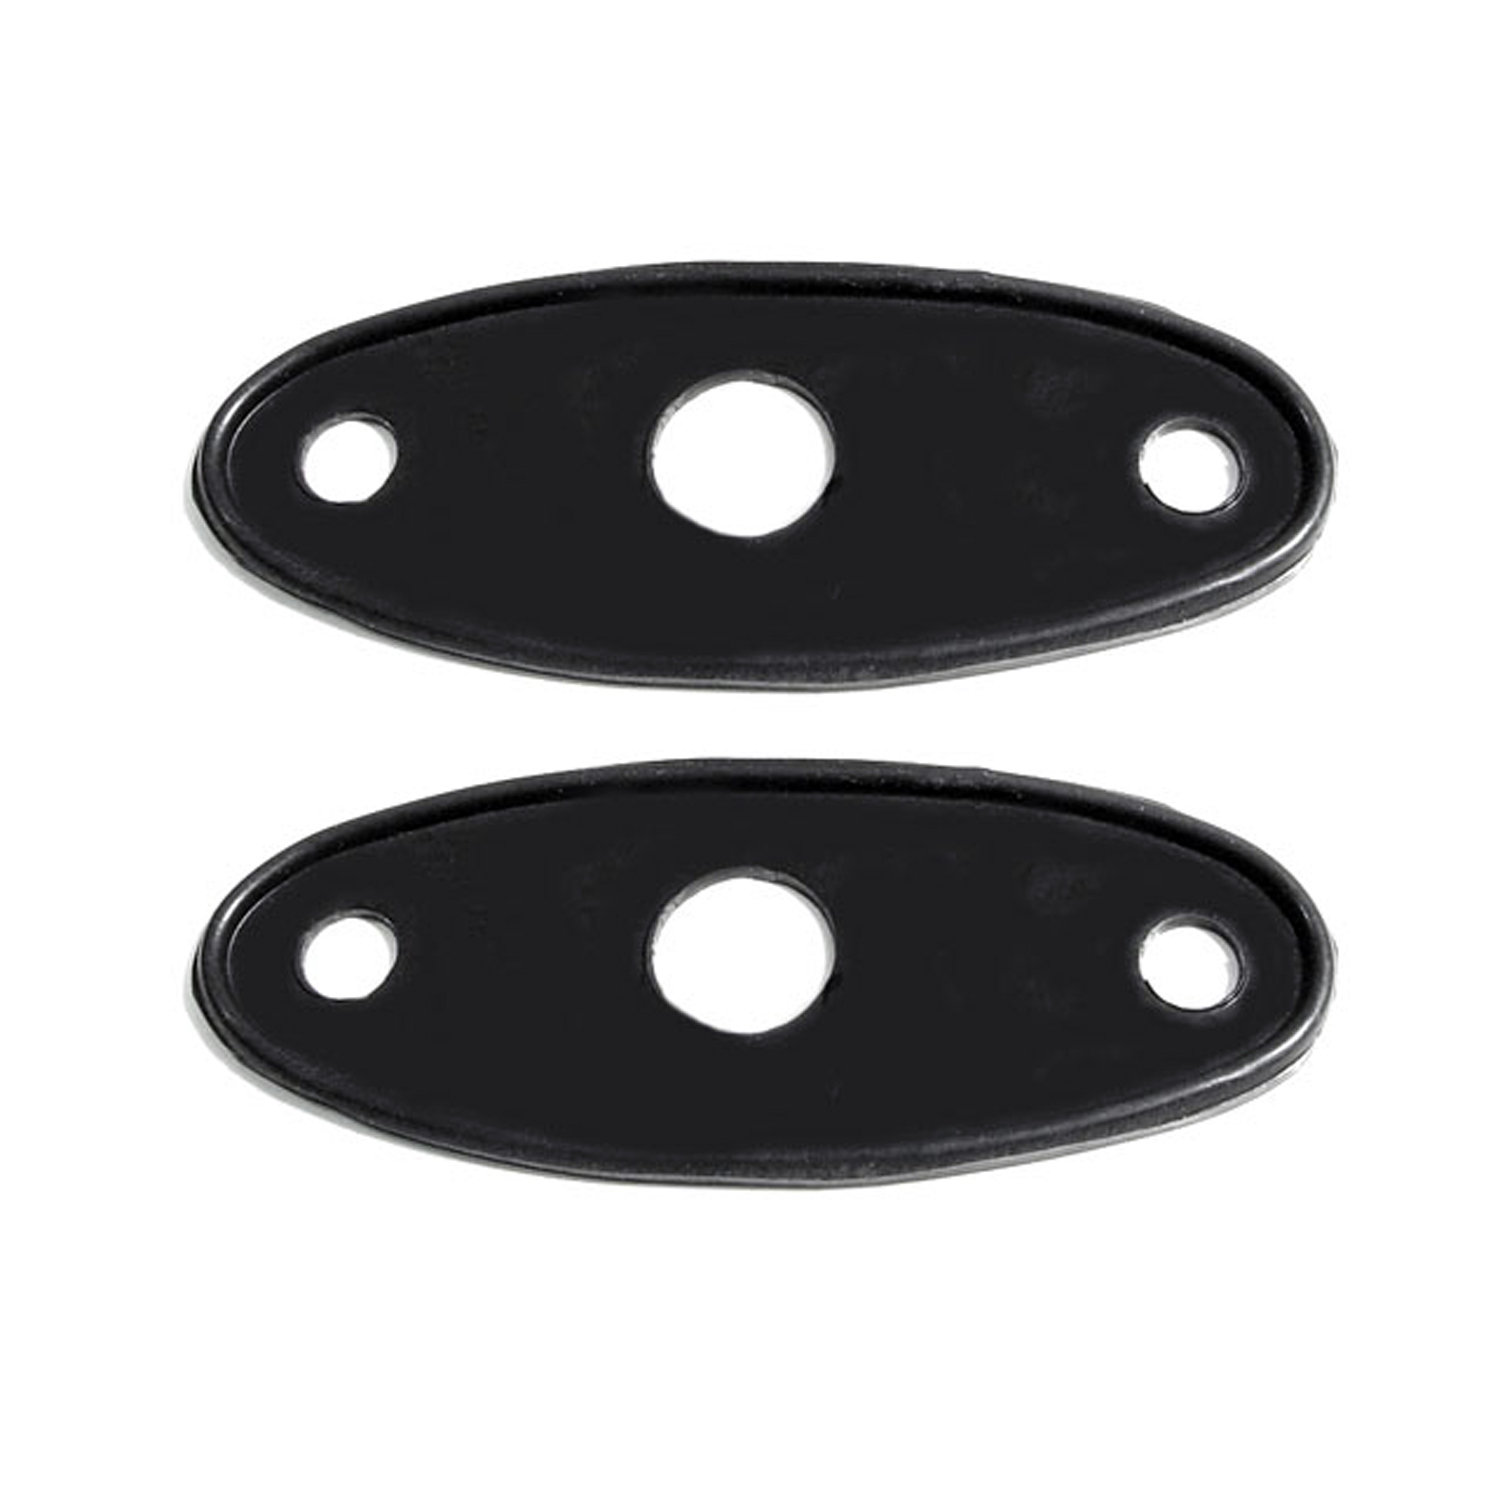 1932 Reo Flying Cloud Side Tire Bracket Mounting Pads.  1-1/2 wide X 3-4/8 long-MP 993-C